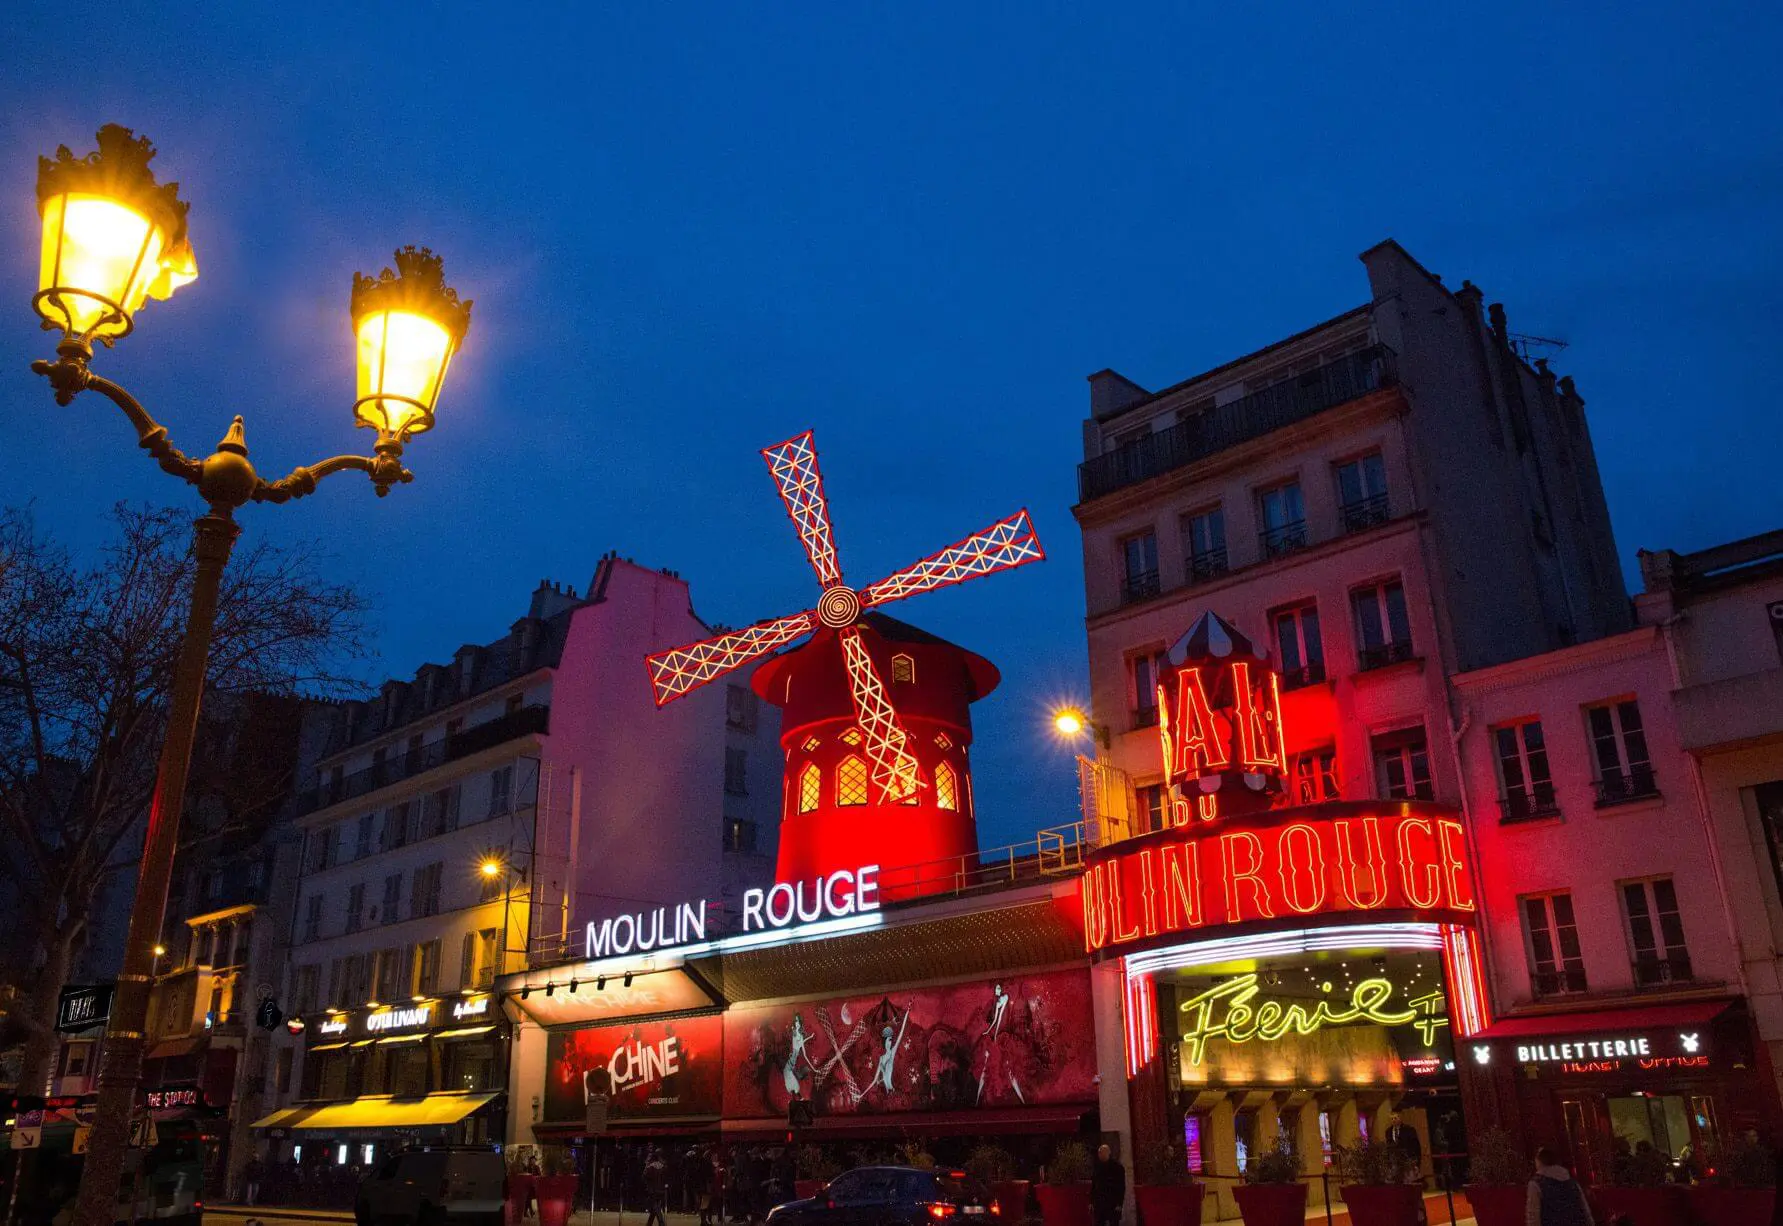 Moulin Rouge lit up outside during the evening